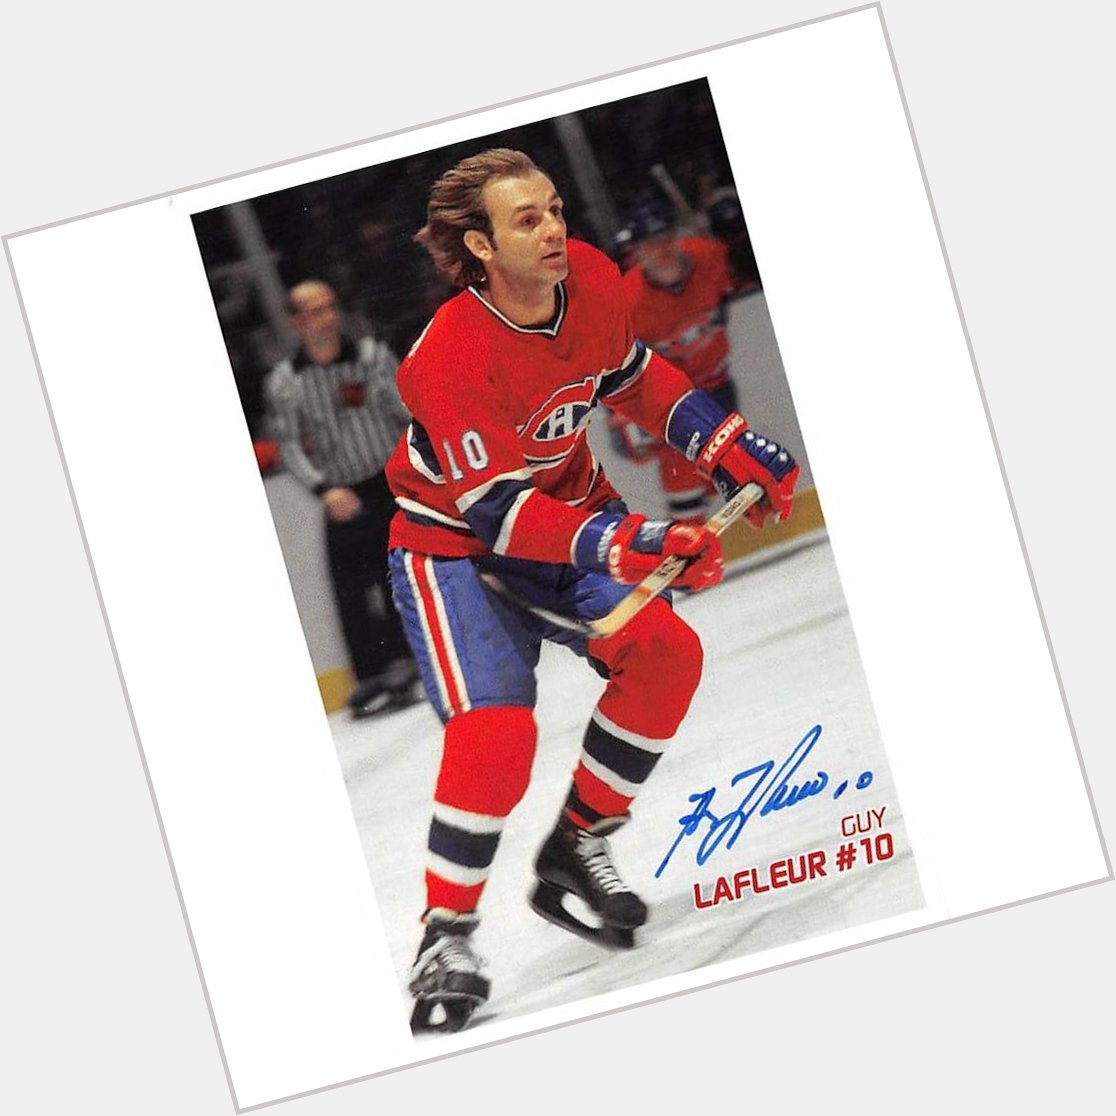 Happy birthday to the great Guy LaFleur, owner of the best hockey hair of all-time 